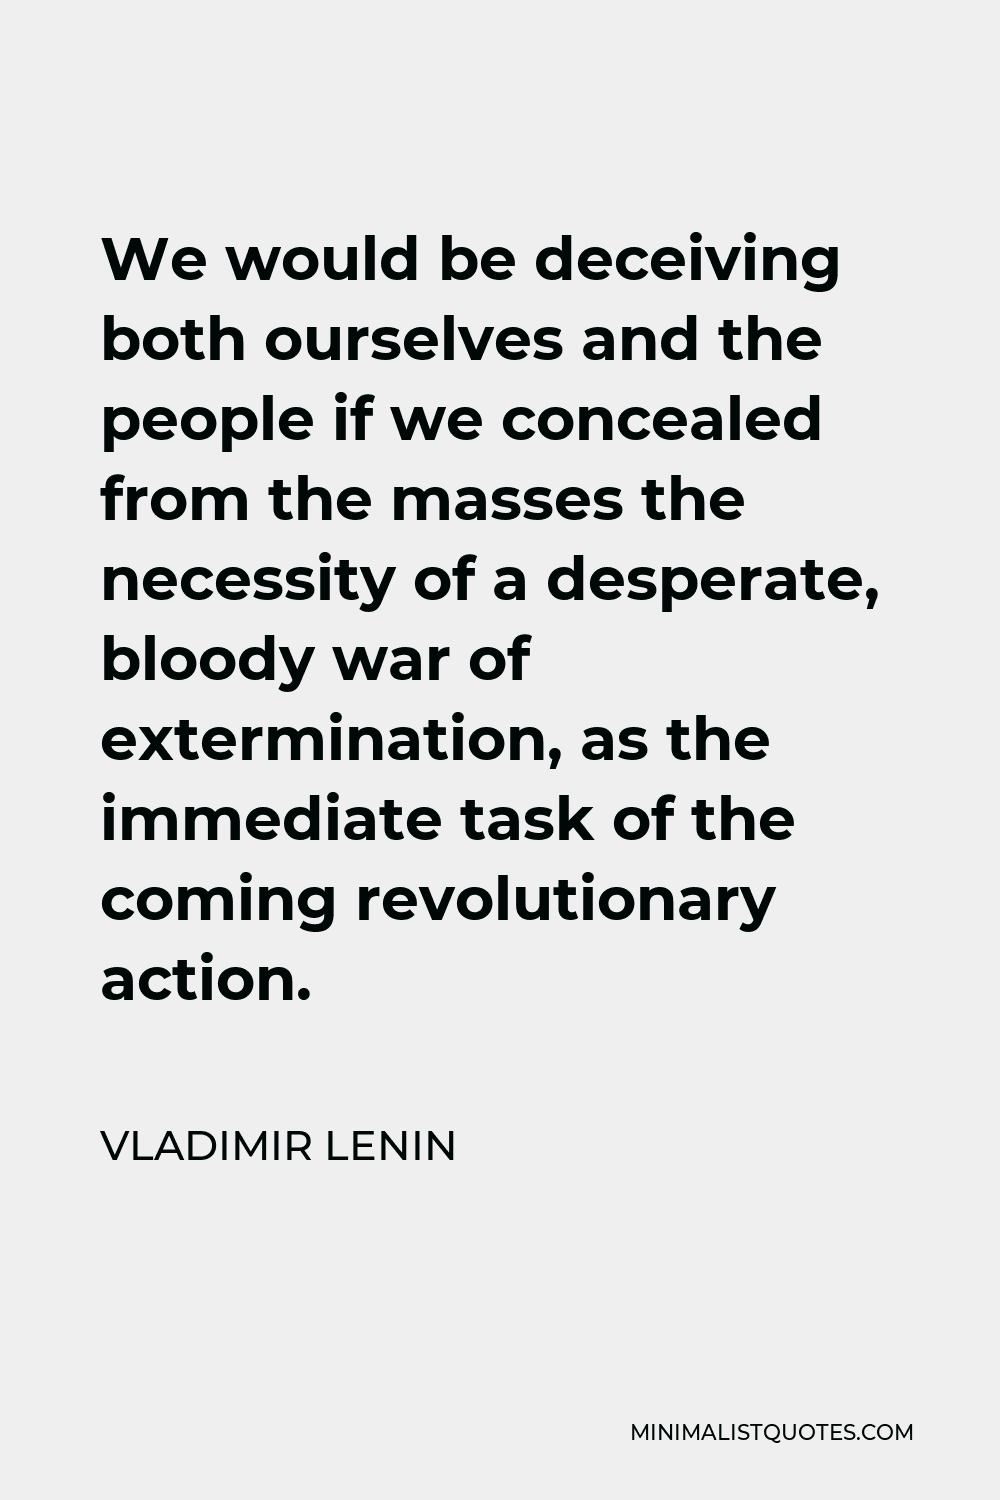 Vladimir Lenin Quote - We would be deceiving both ourselves and the people if we concealed from the masses the necessity of a desperate, bloody war of extermination, as the immediate task of the coming revolutionary action.